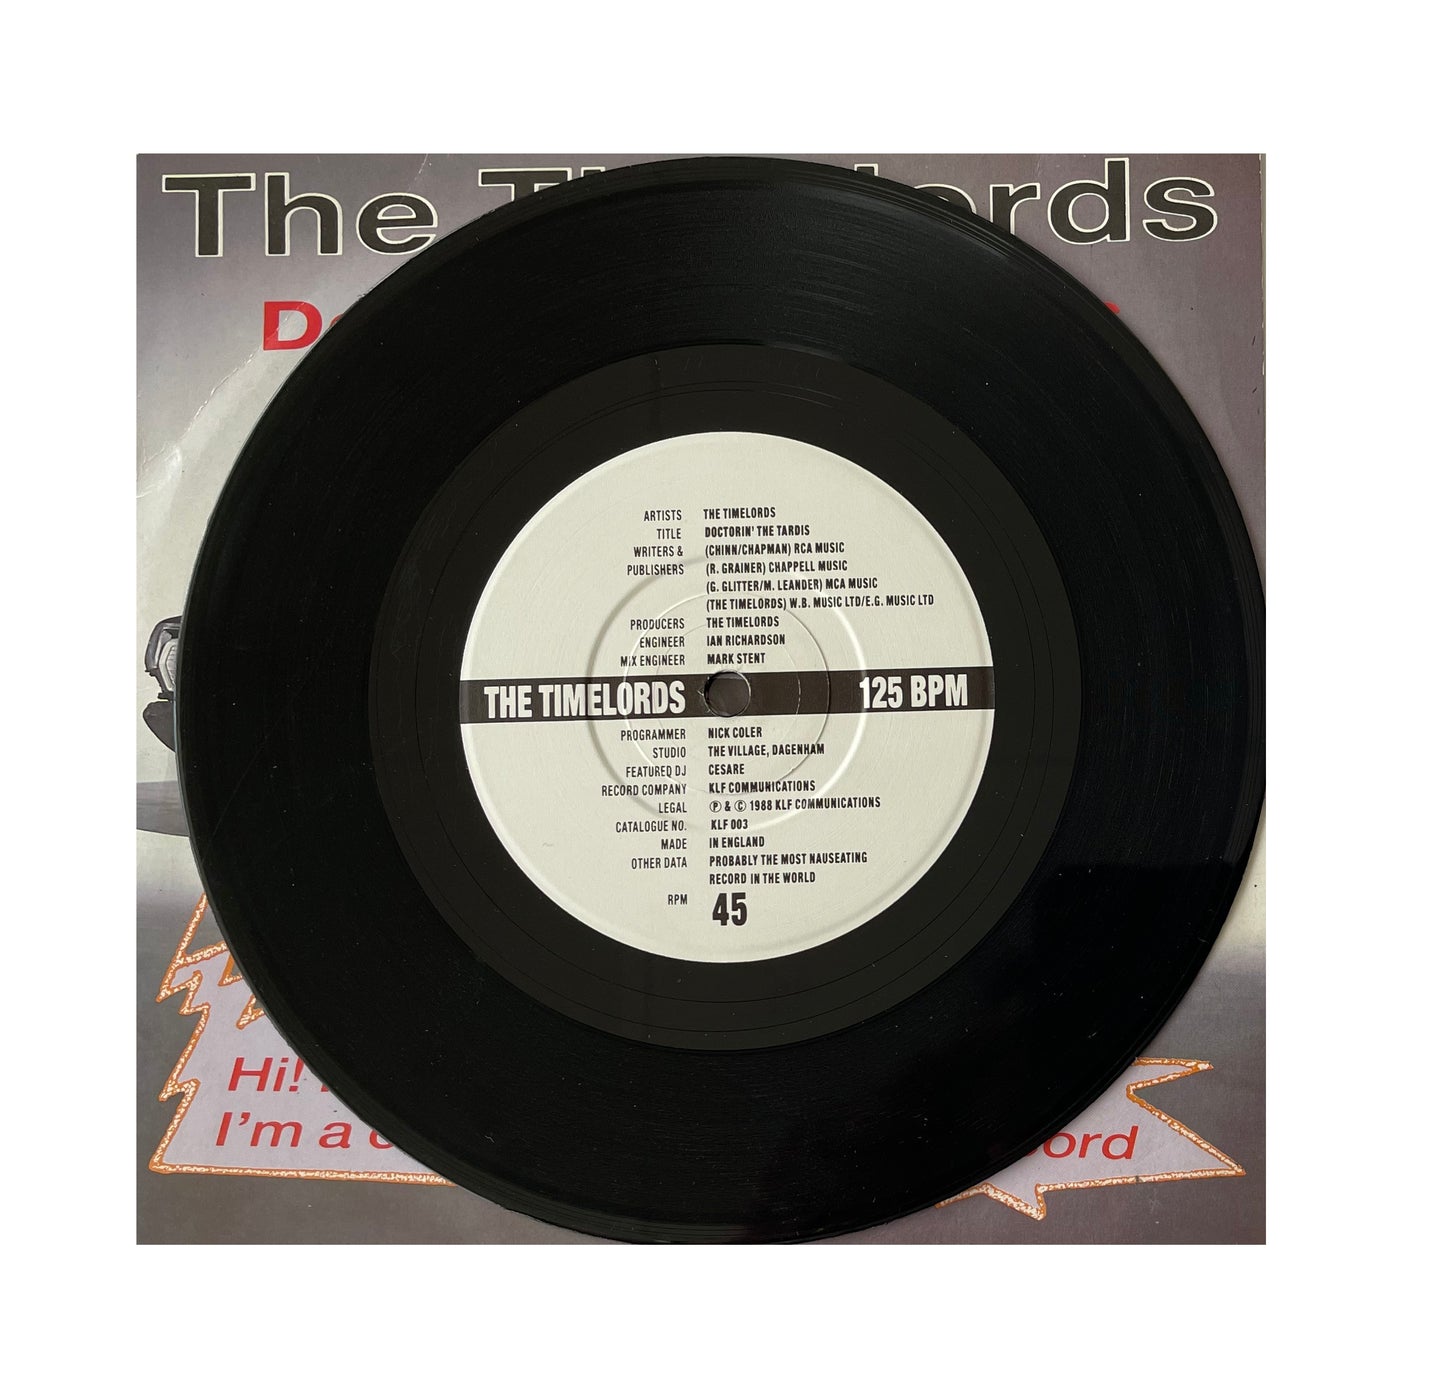 Vintage 1988 The Timelords - Doctorin' The Tardis 7 Inch Vinyl Record - Shop Stock Room Find